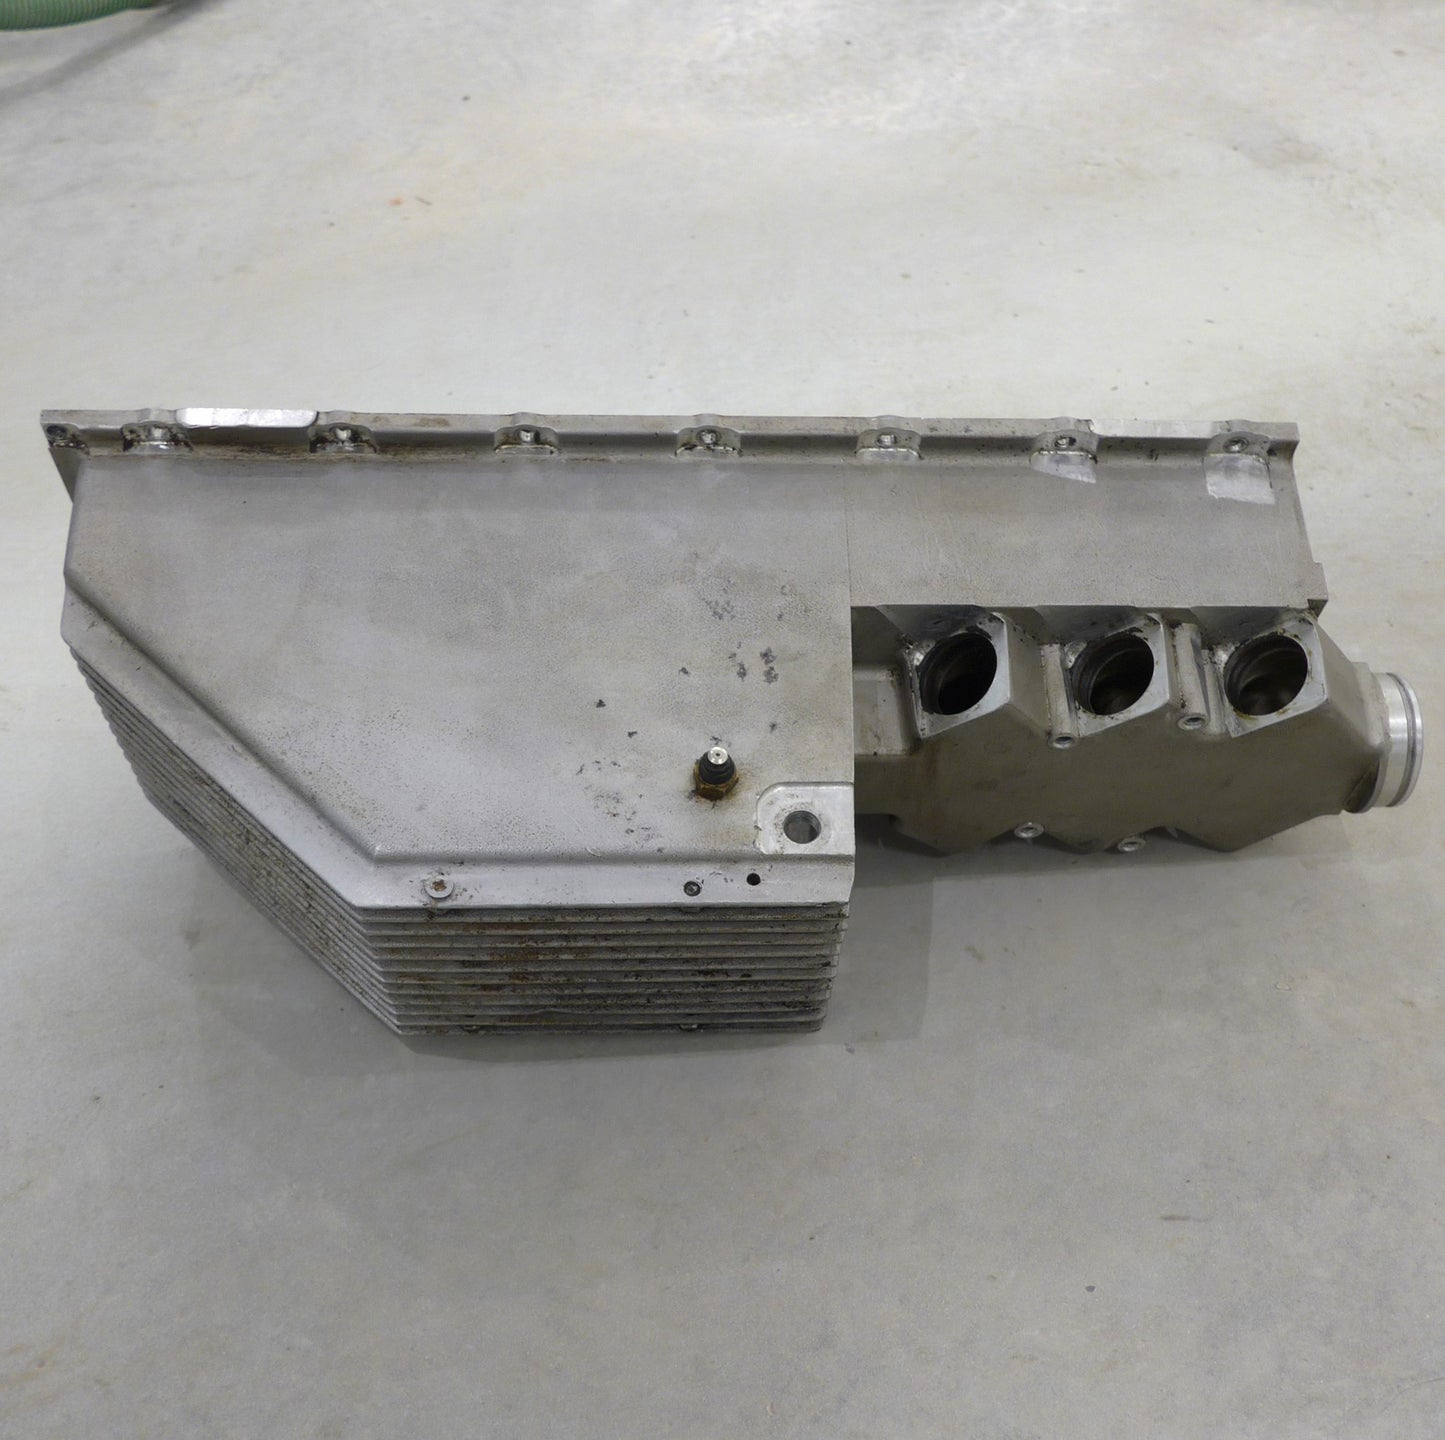 Sump Machined 3300 With Induction (Integral plenum) (A/R)